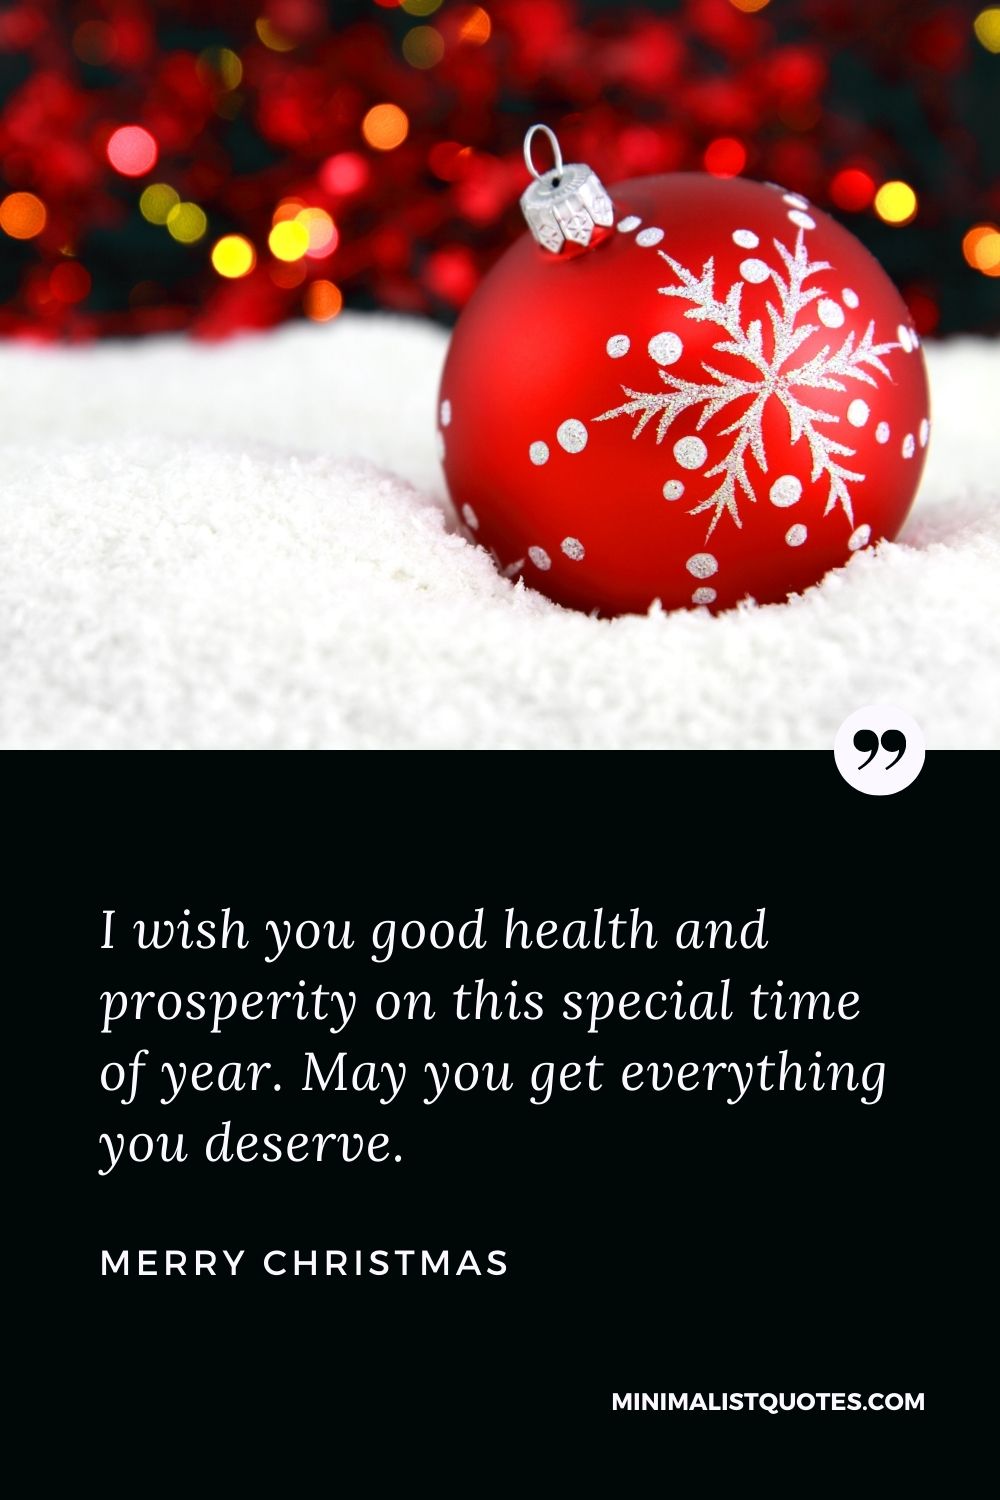 I wish you good health and prosperity on this special time of year ...